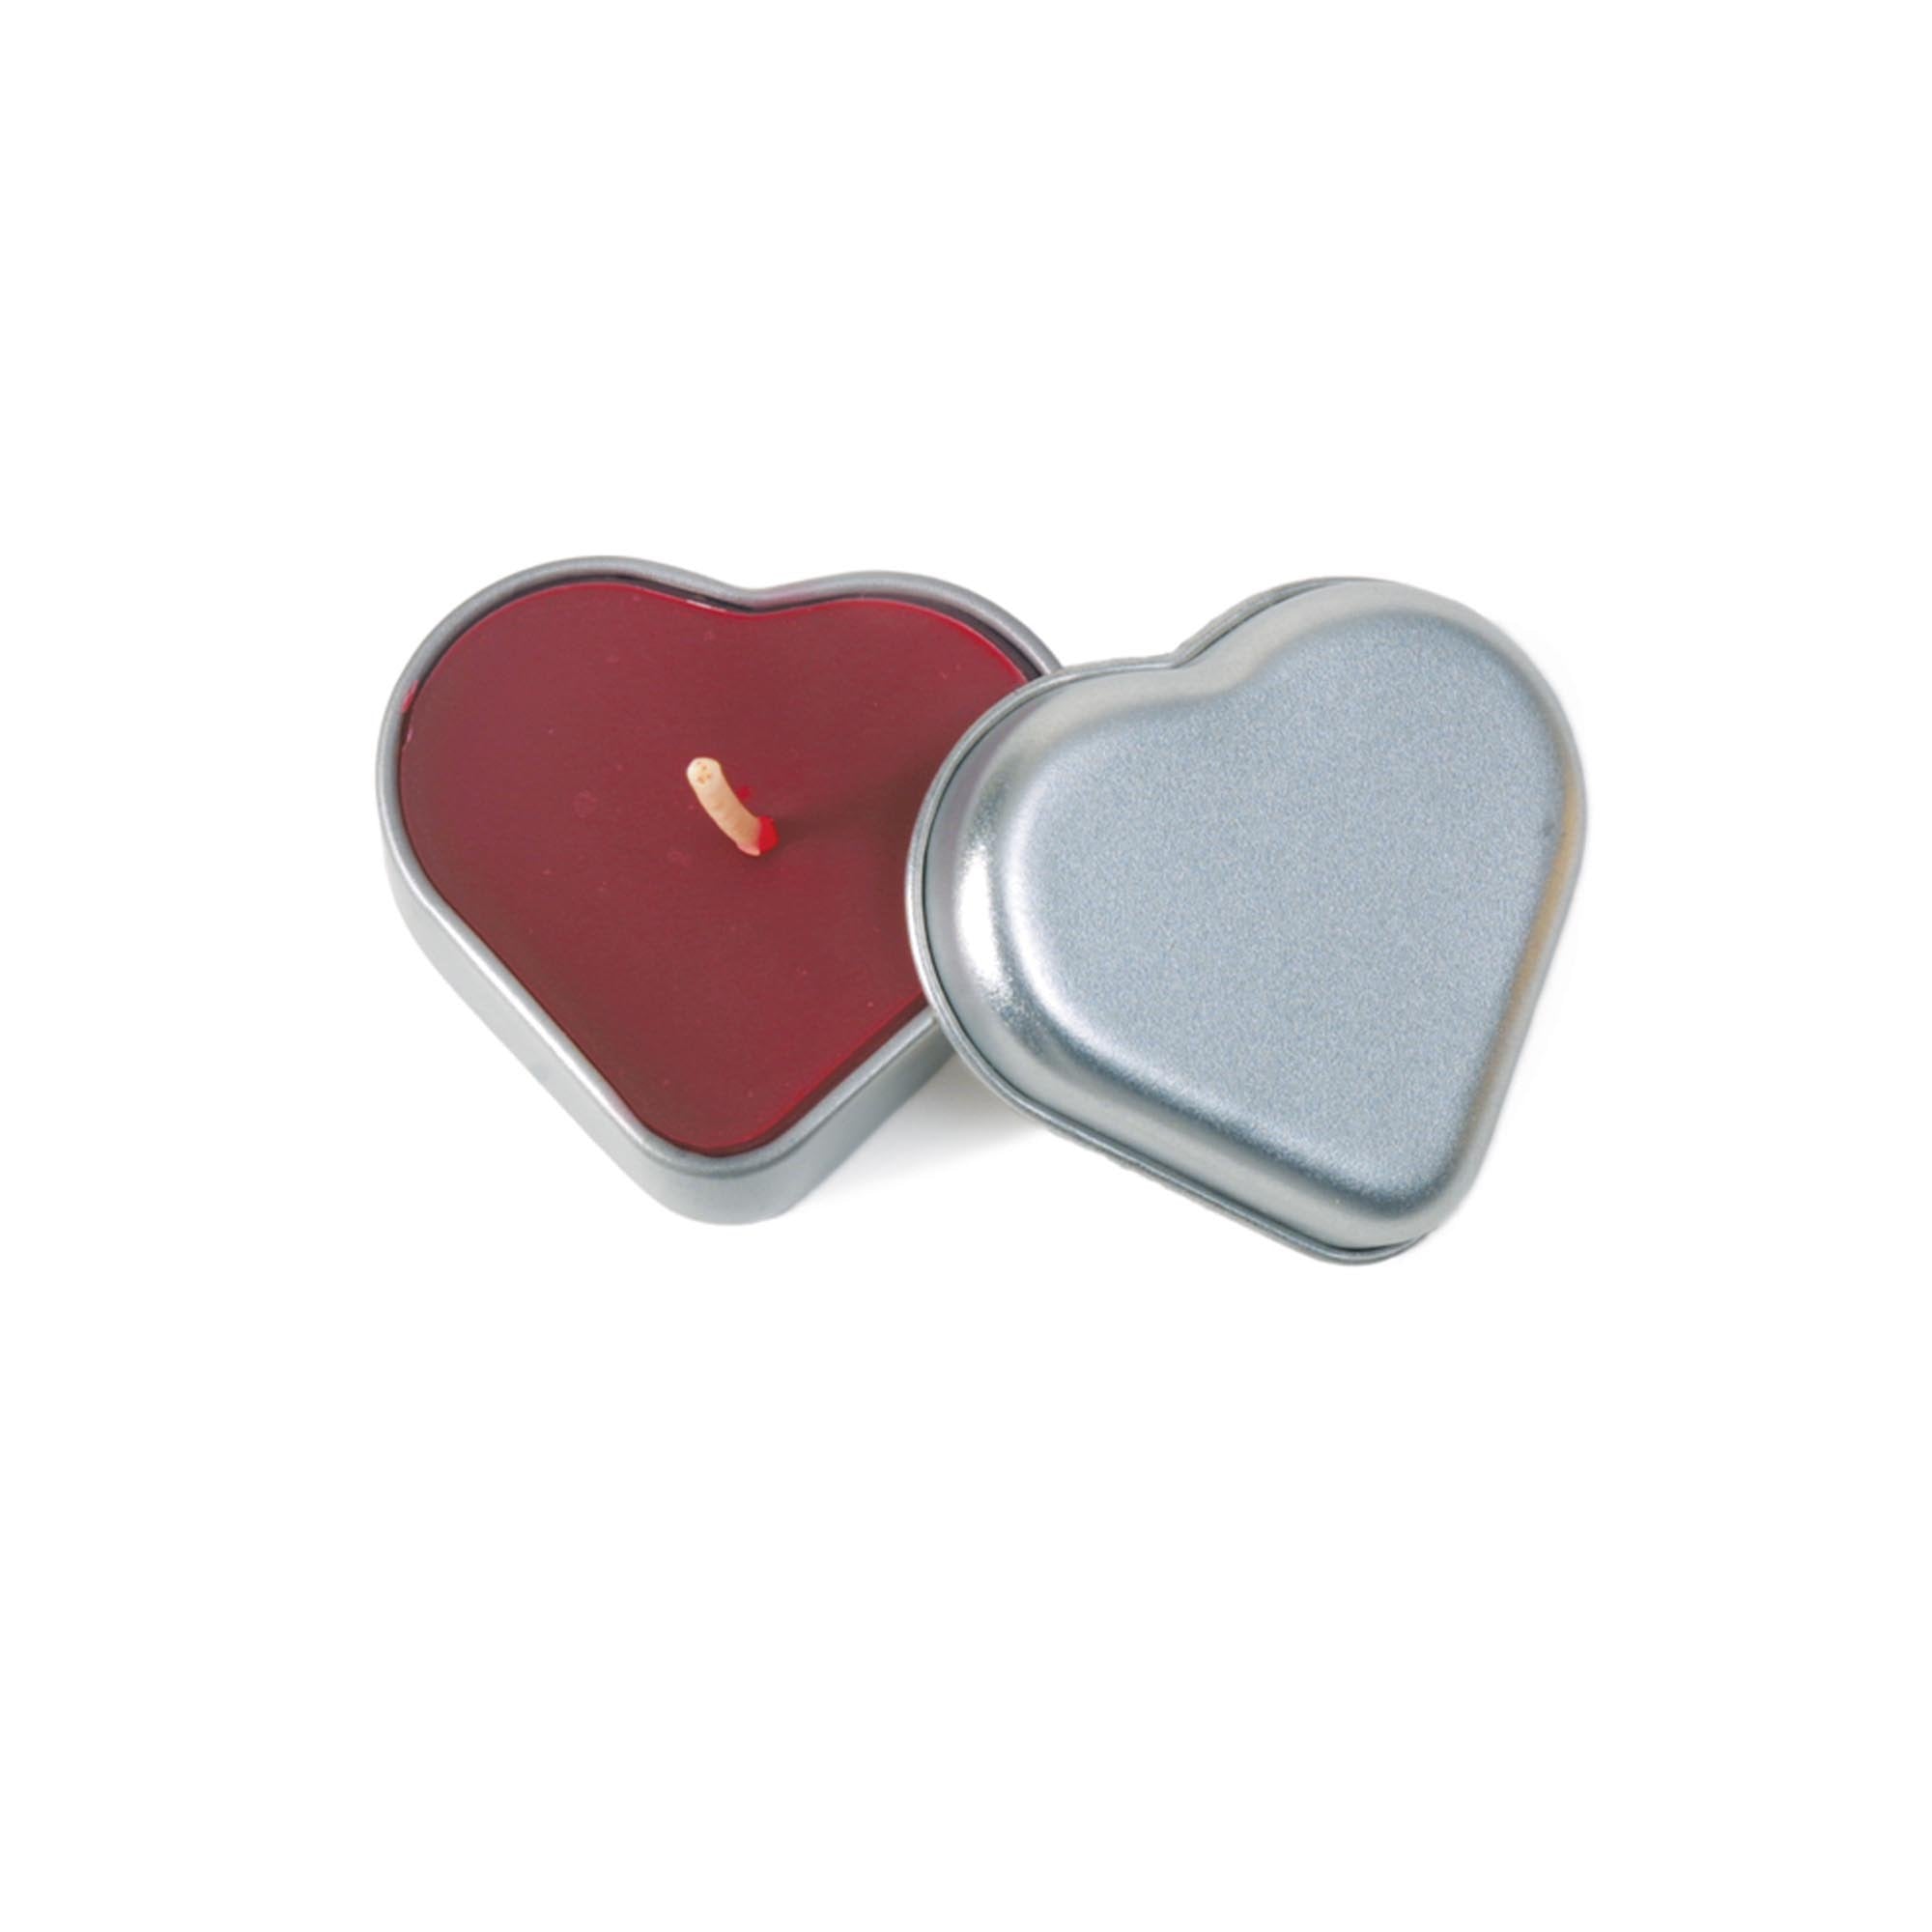 100% Pure Beeswax Heart Candle Tin, heart shaped candle with lid off exposing ruby red wax, and white cotton wick